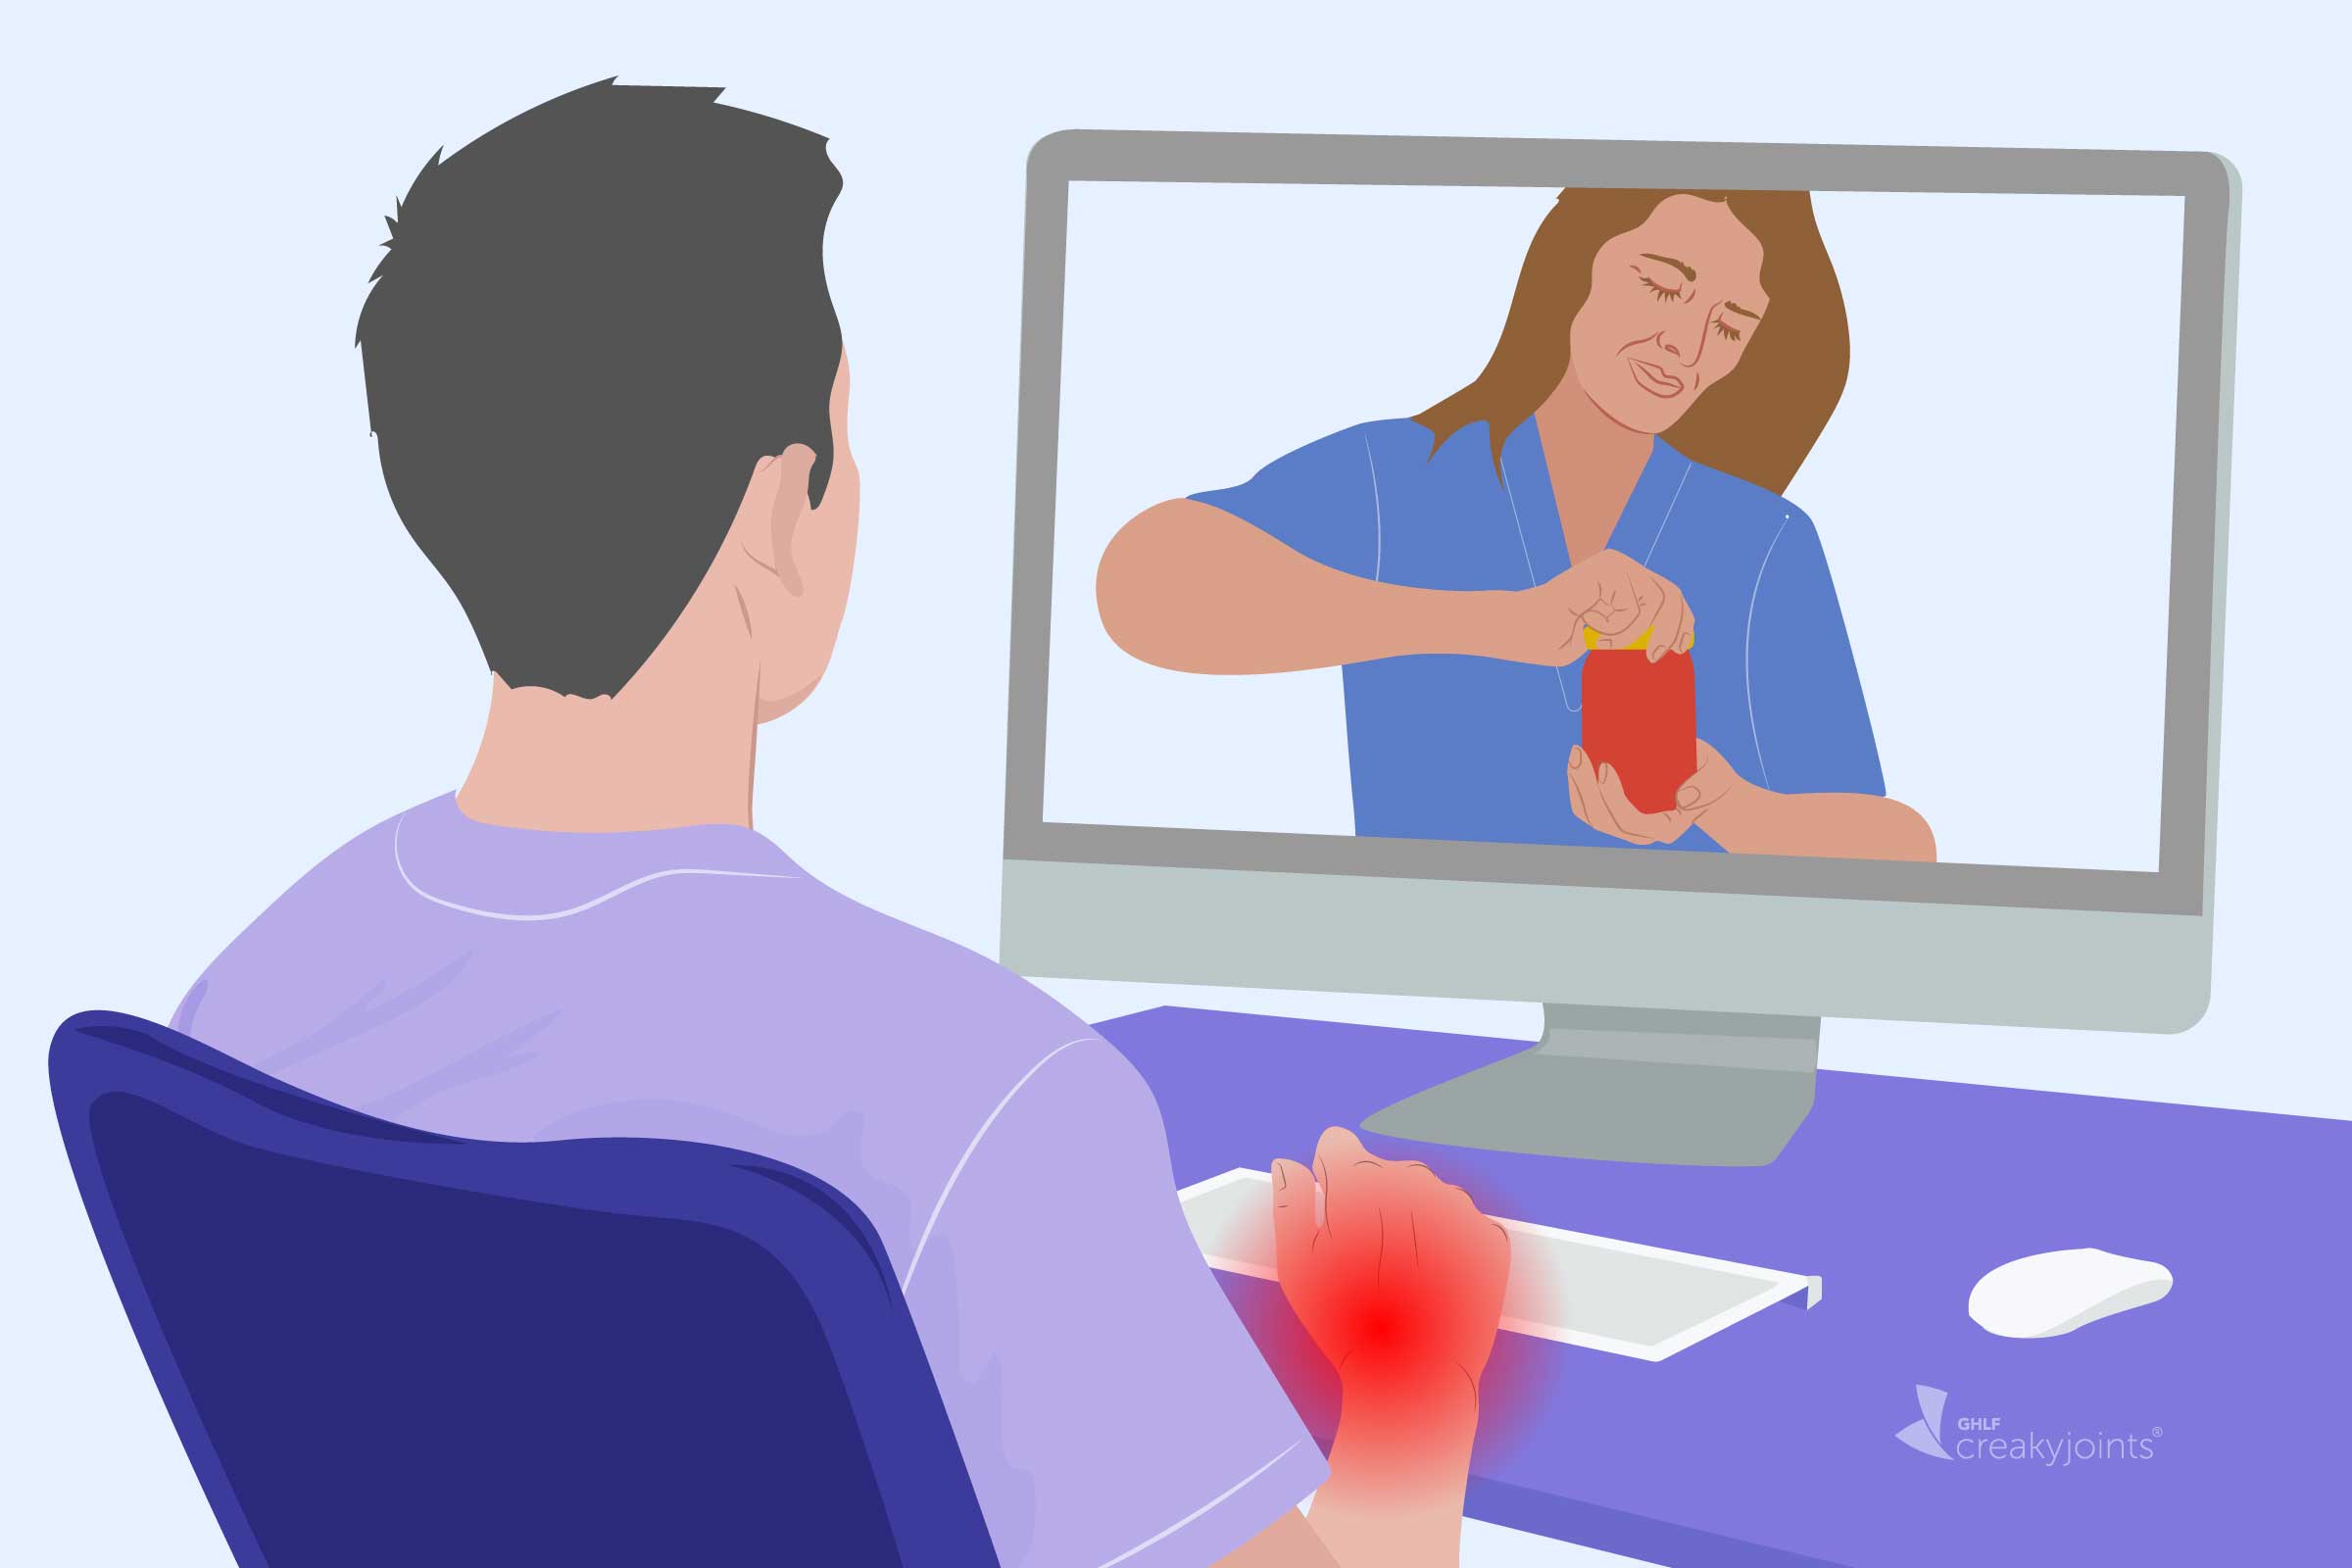 An illustration of a person with arthritis, as indicated by red pain spots on their arms and hands, meeting with an occupational therapist over the computer. The occupational therapist is wearing scrubs and holding a jar to demonstrate the best way to open a jar when you have arthritis.